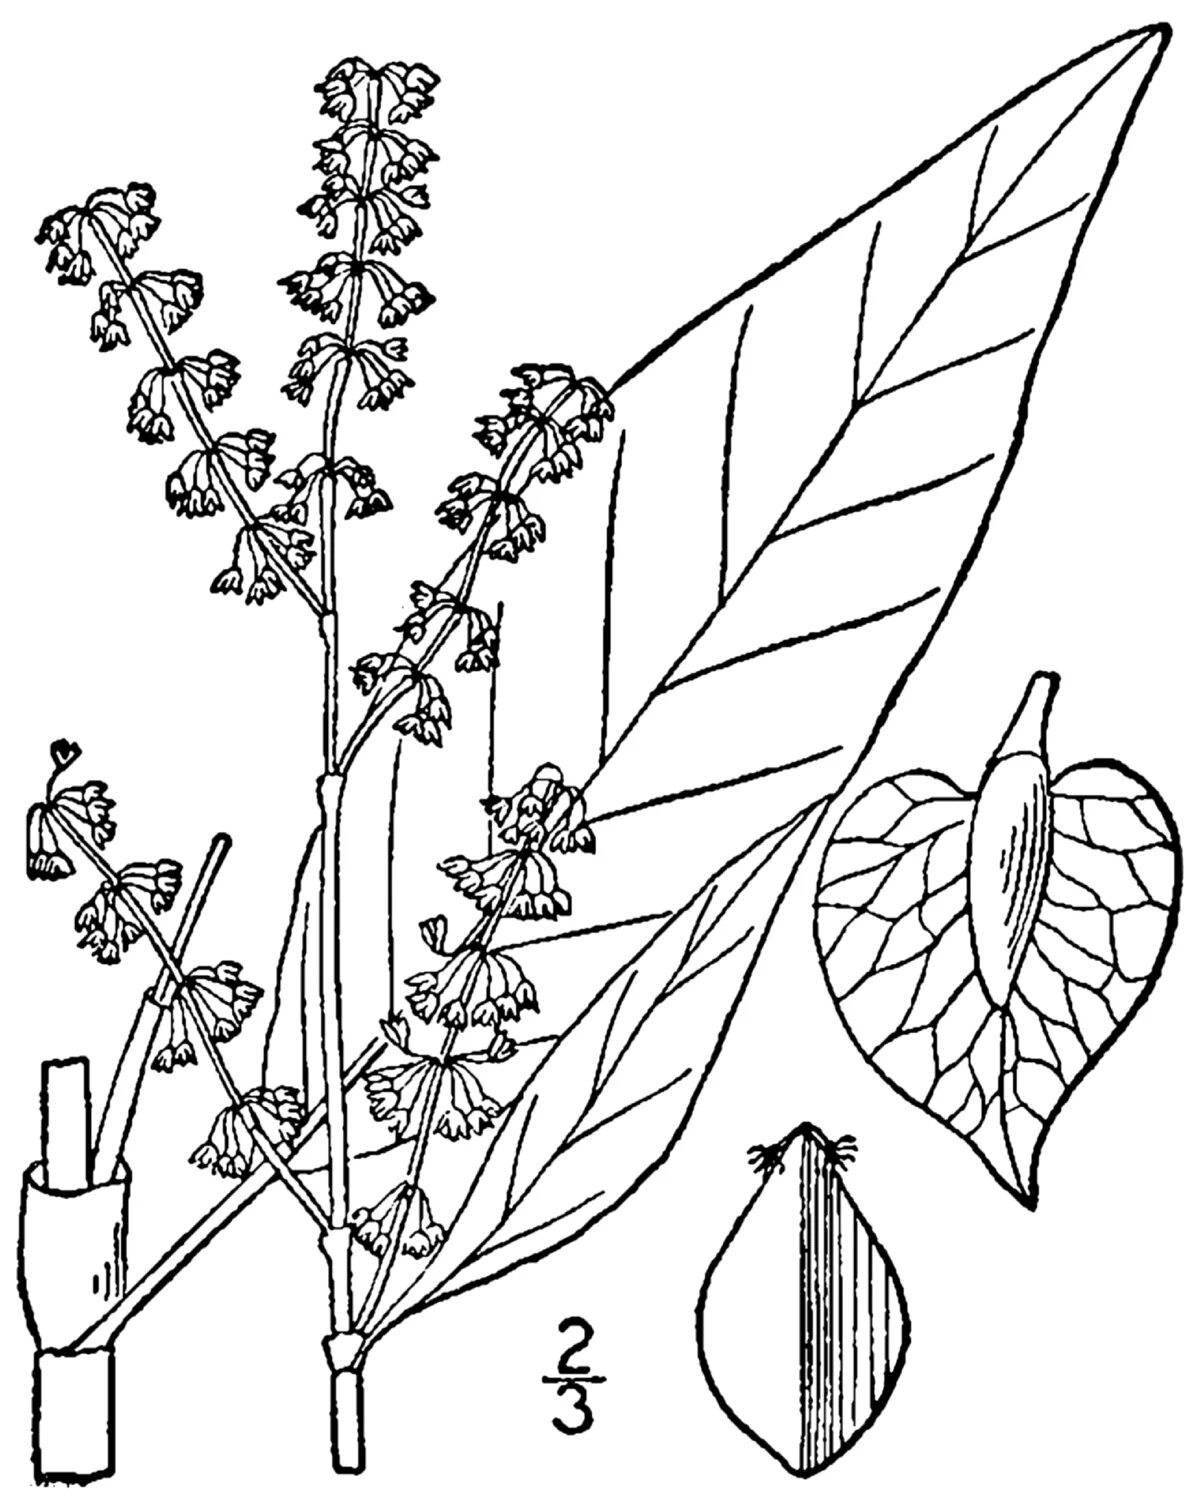 Sorrel coloring page for kids